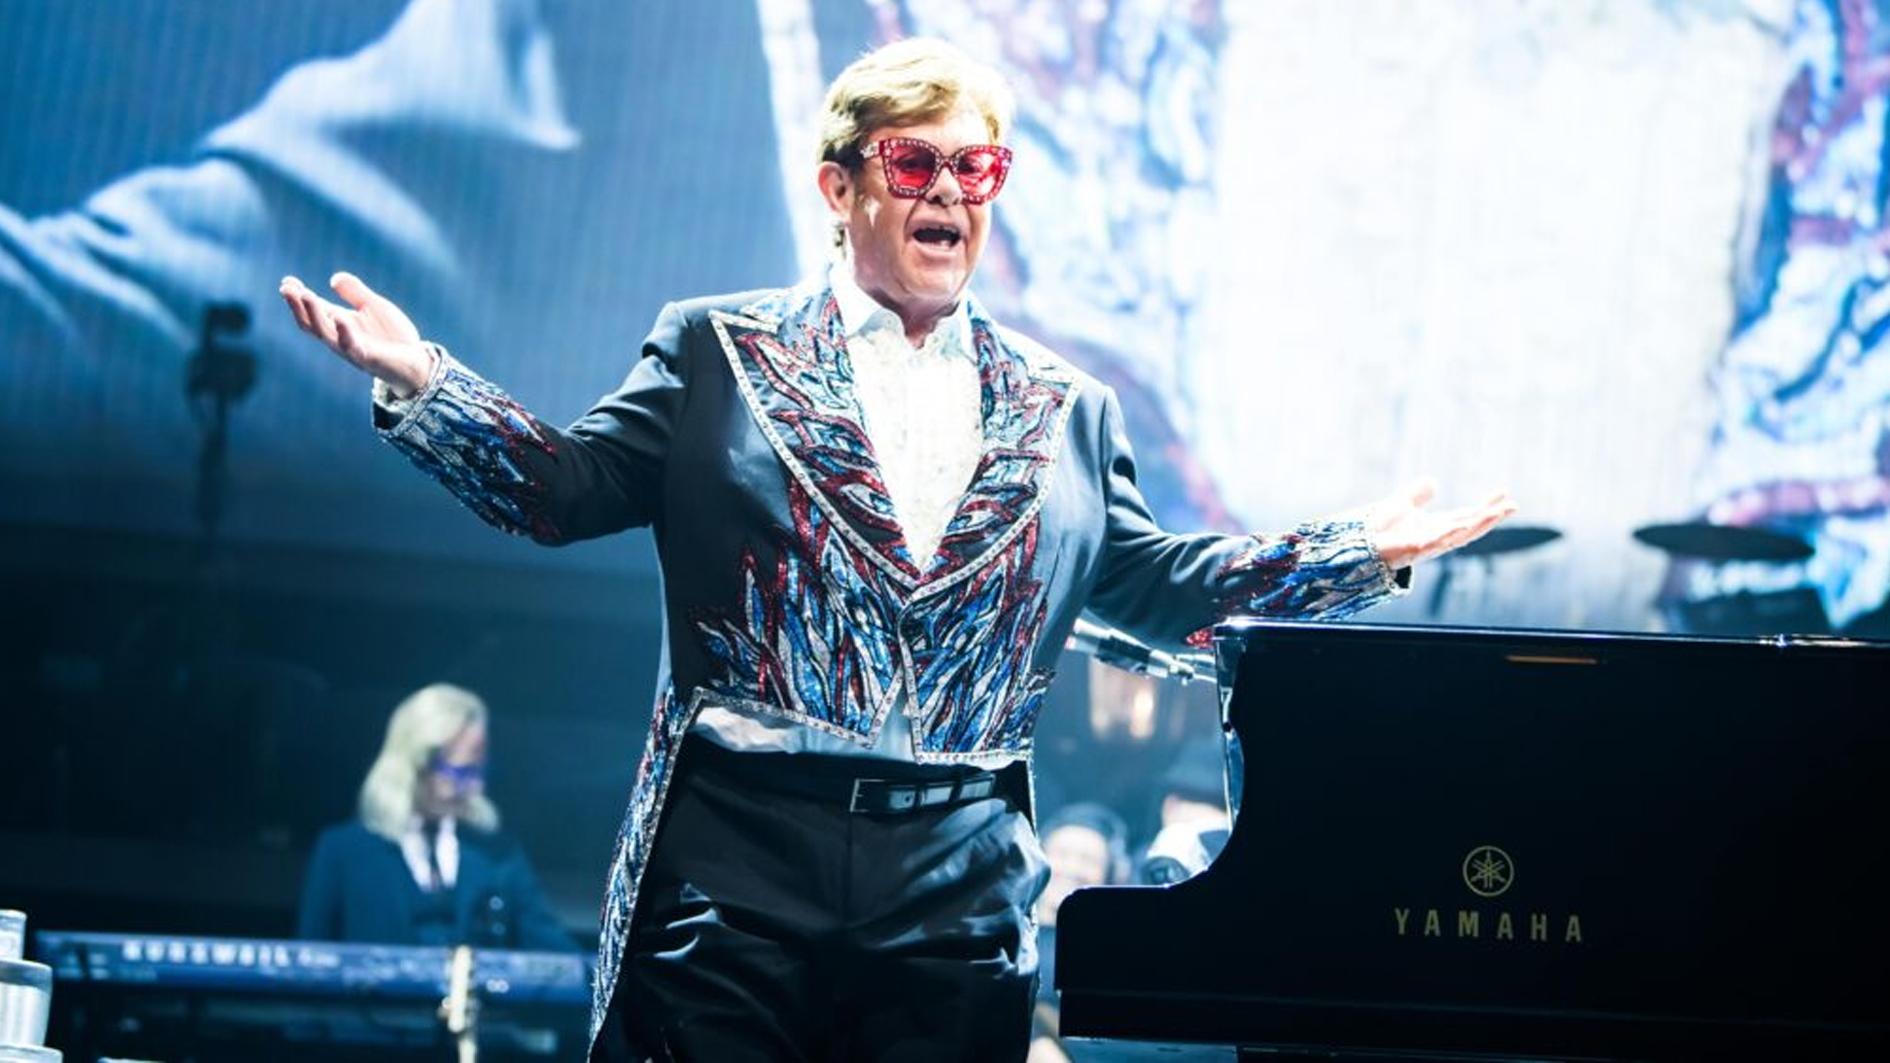 Excitement and emotion abound at Elton John’s farewell party in Stockholm